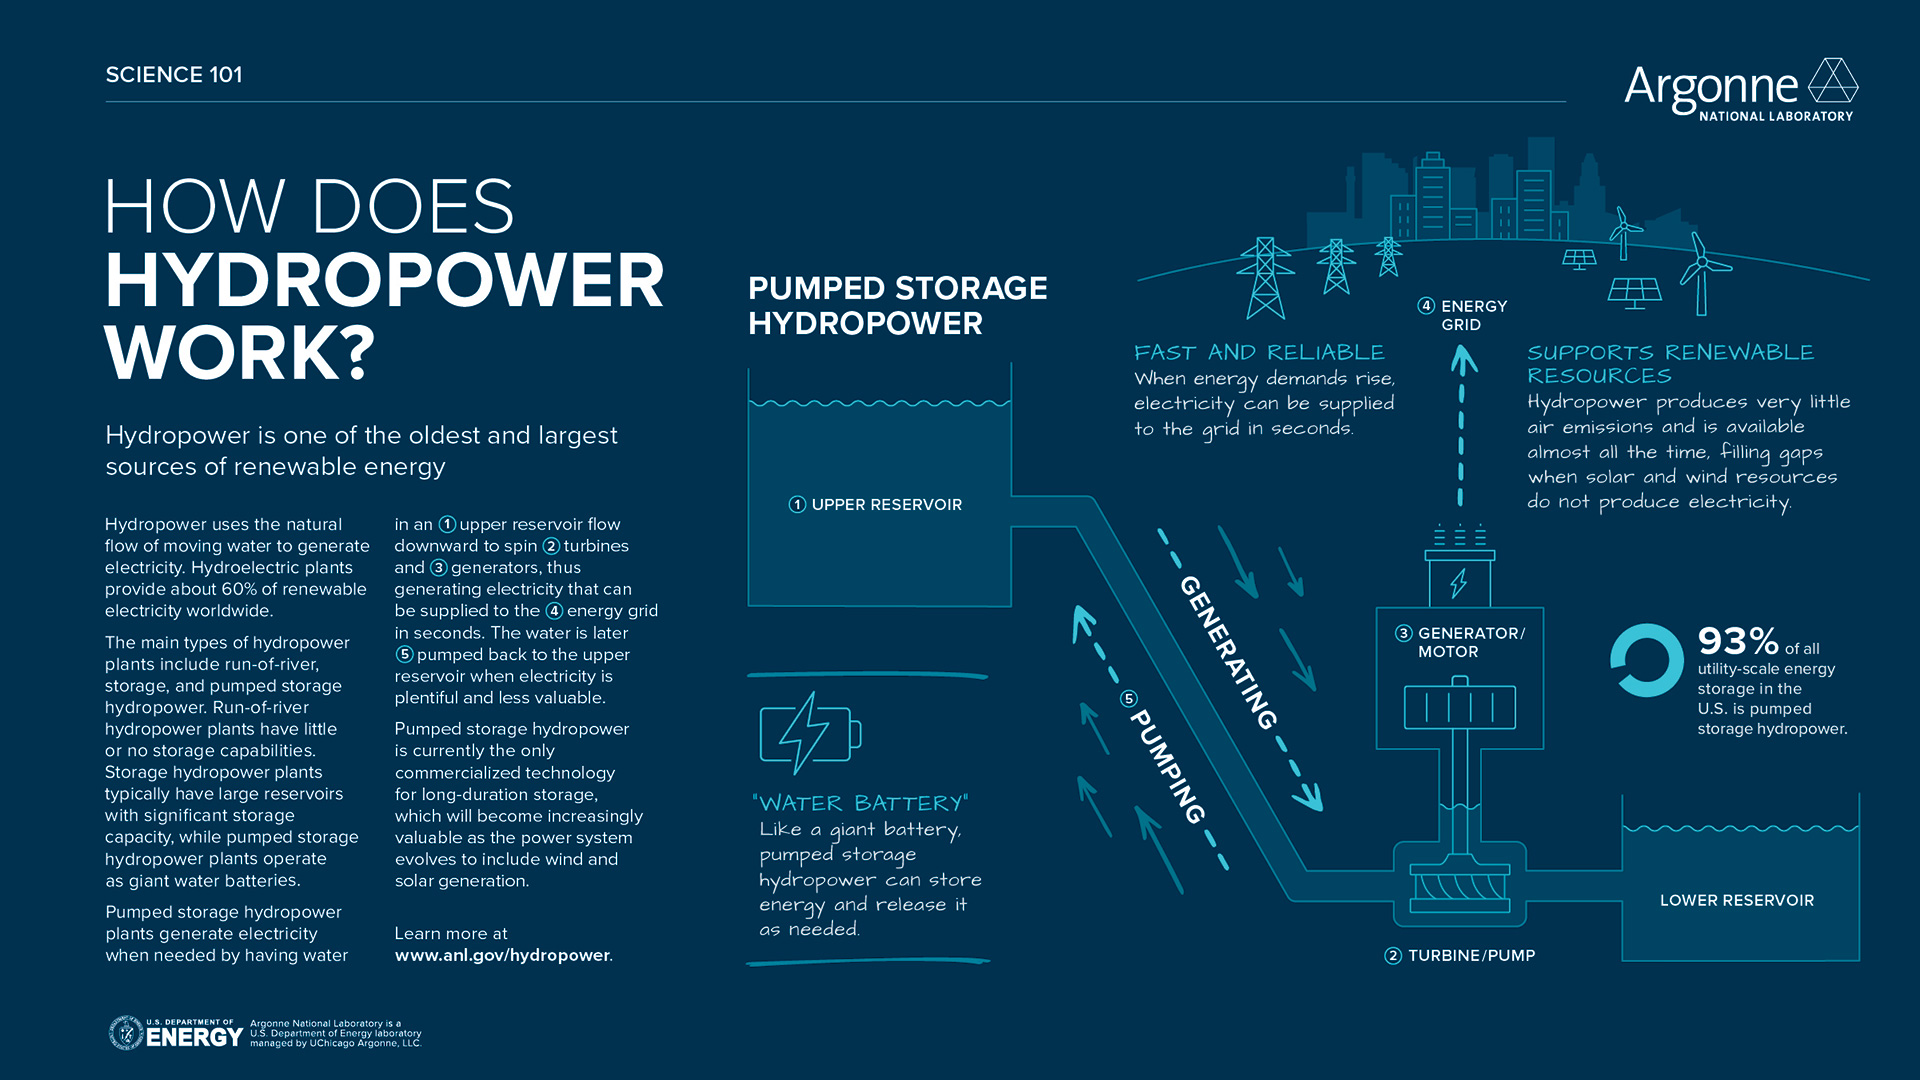 Science 101 Hydropower infographic